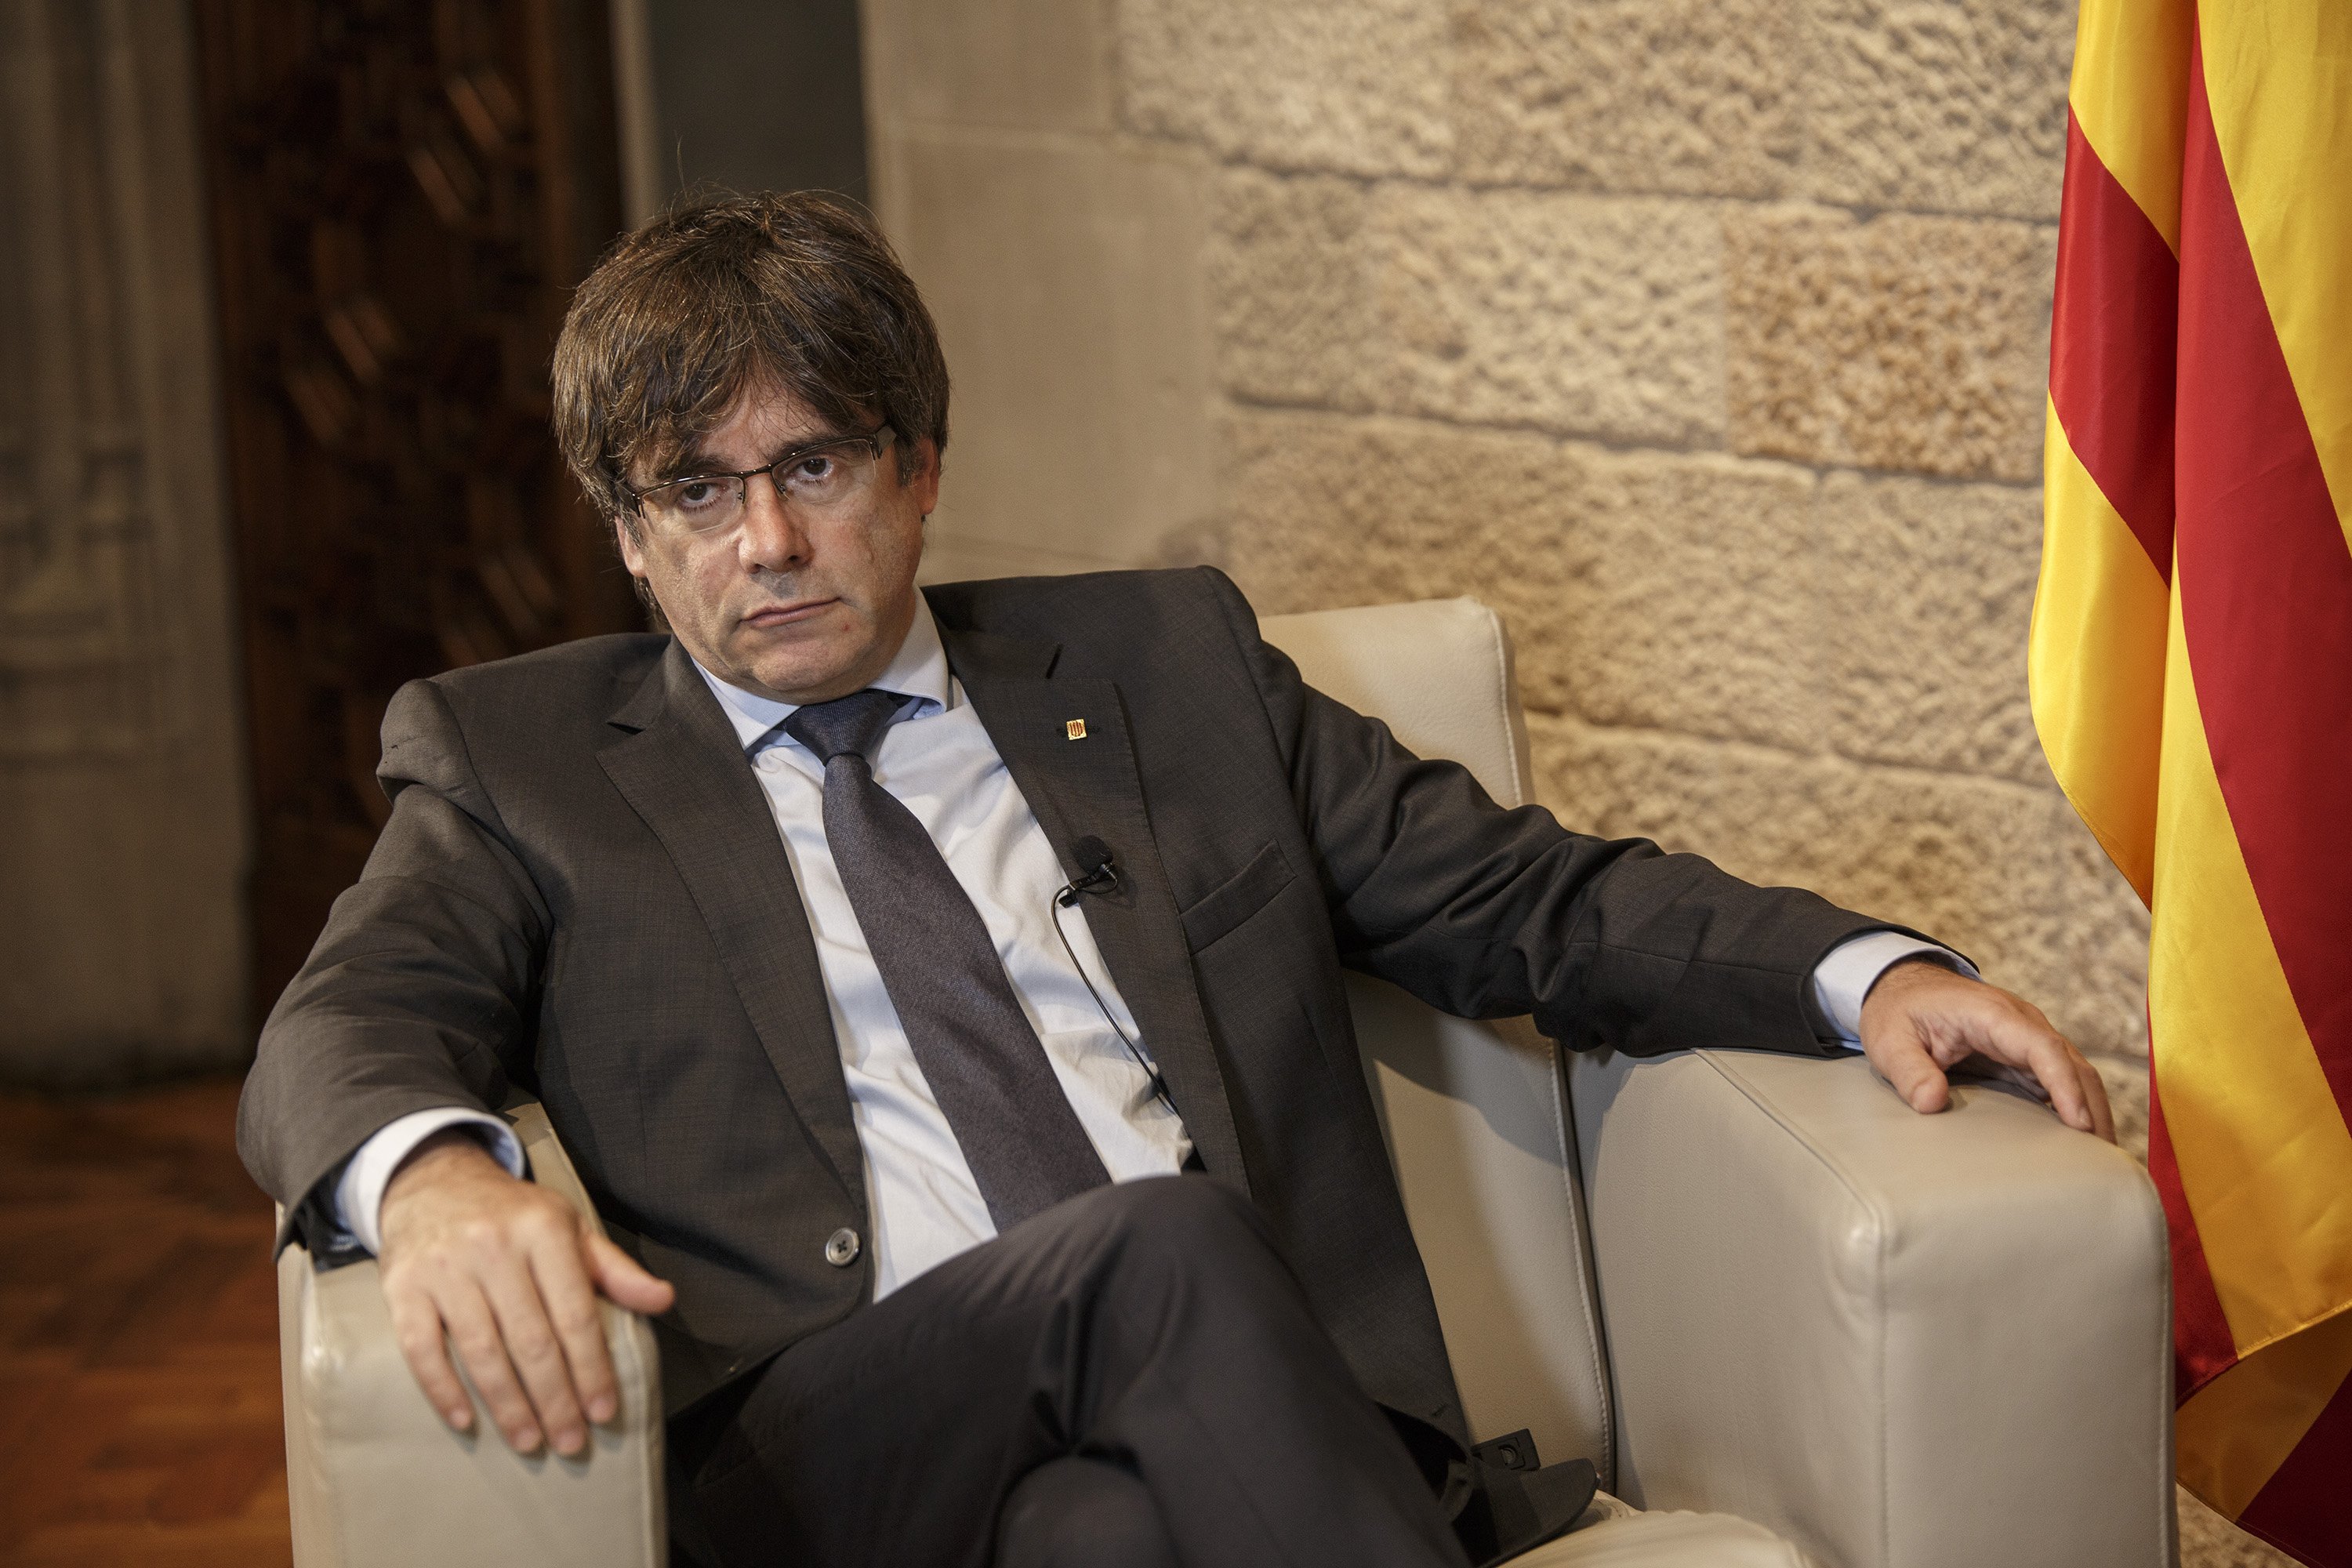 Catalan president sees an army as "absolutely essential" for an independent Catalonia